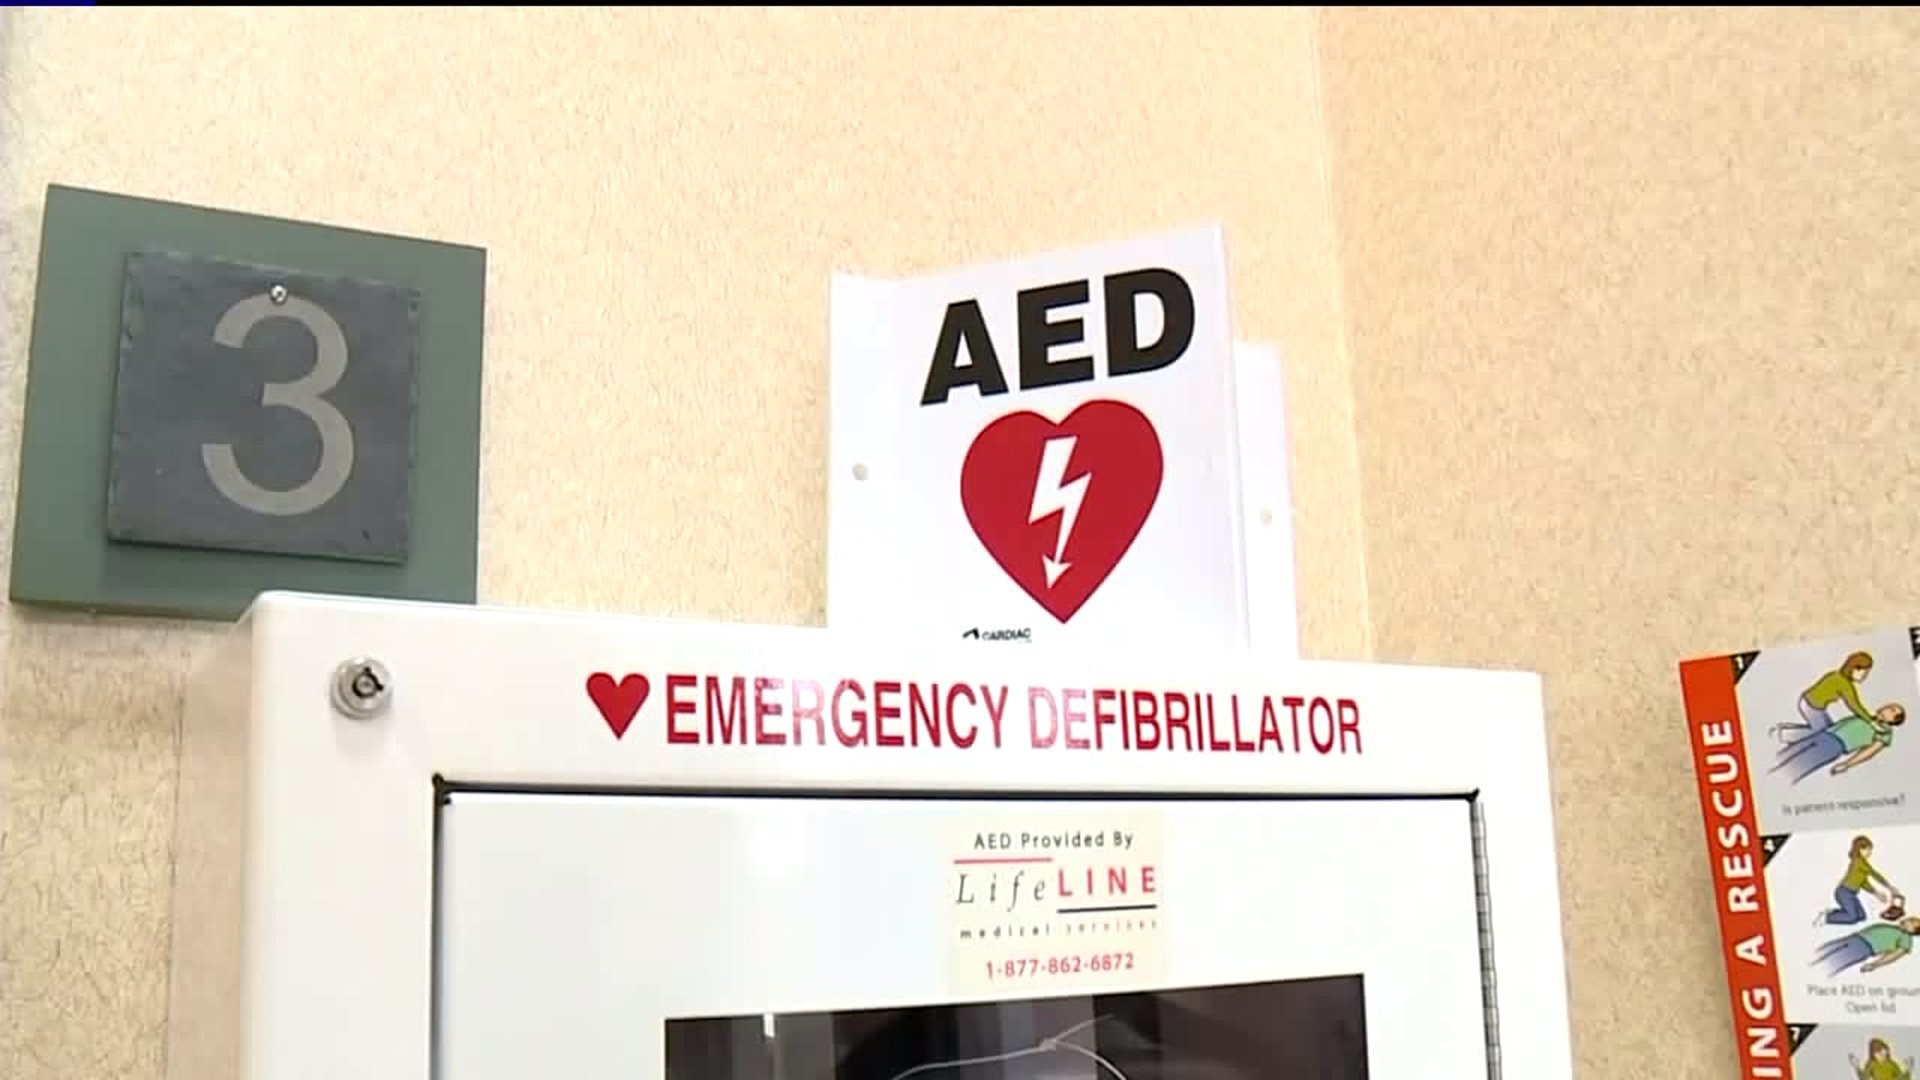 Township Passes Ordinance Requiring AED Devices